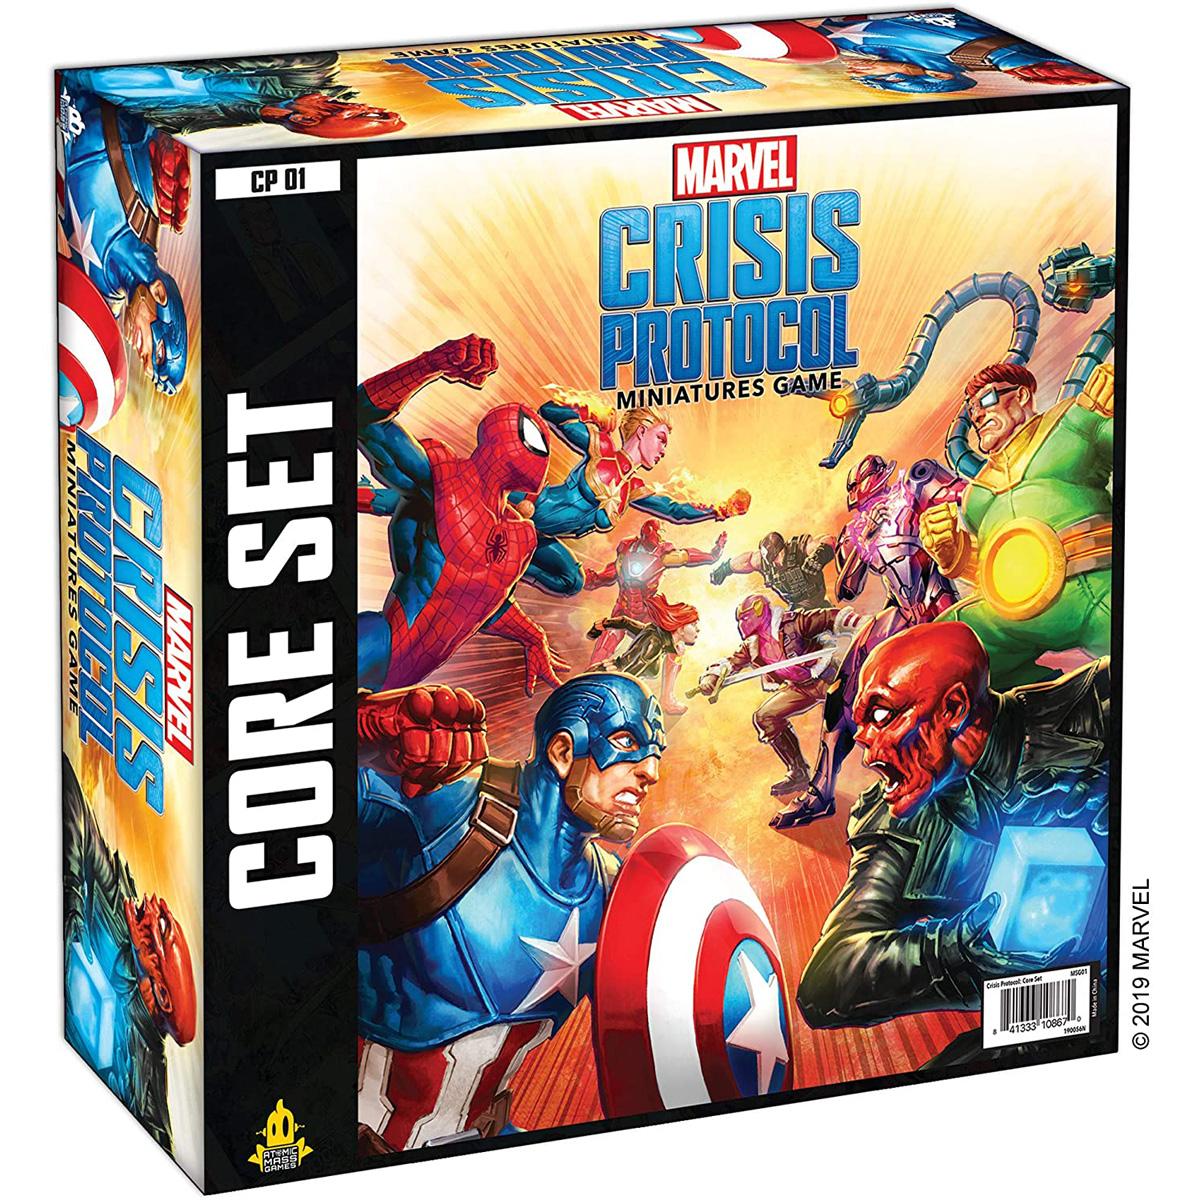 Marvel Crisis Protocol Miniatures Tabletop Game for $68 Shipped